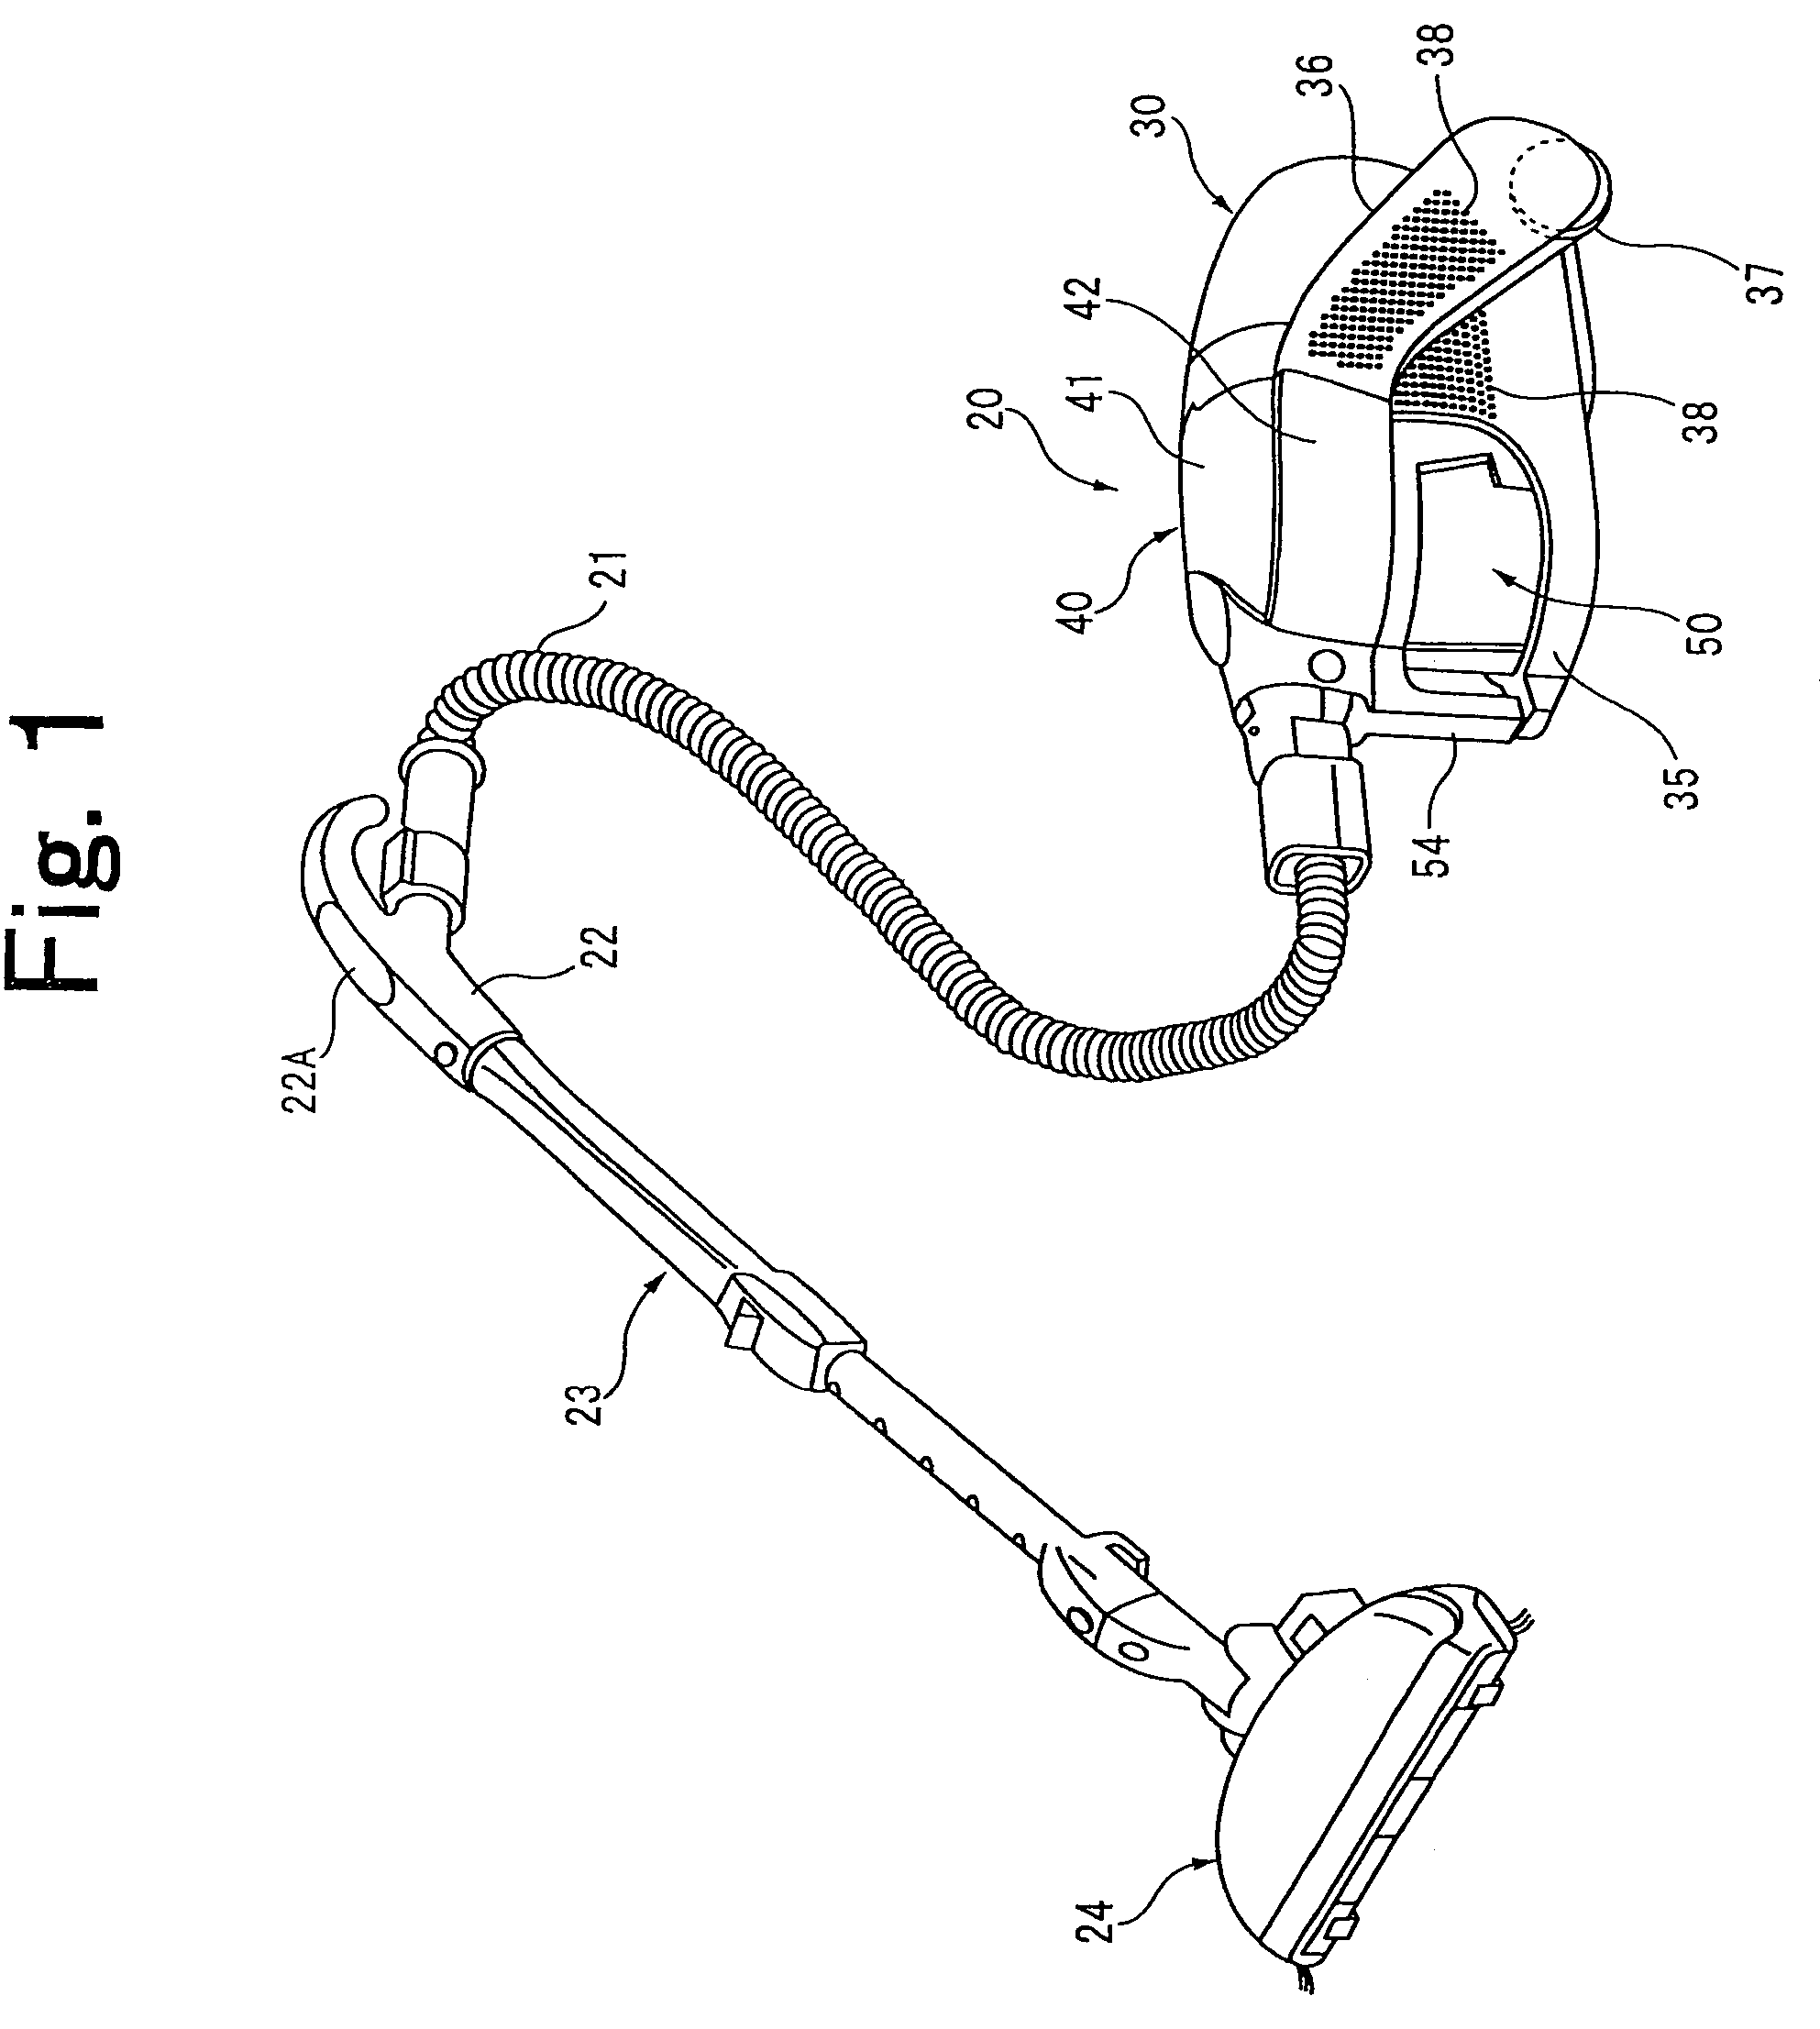 Electric vacuum cleaner provided with a dust separation section for separating sucked dust and dust collecting section for collecting the dust